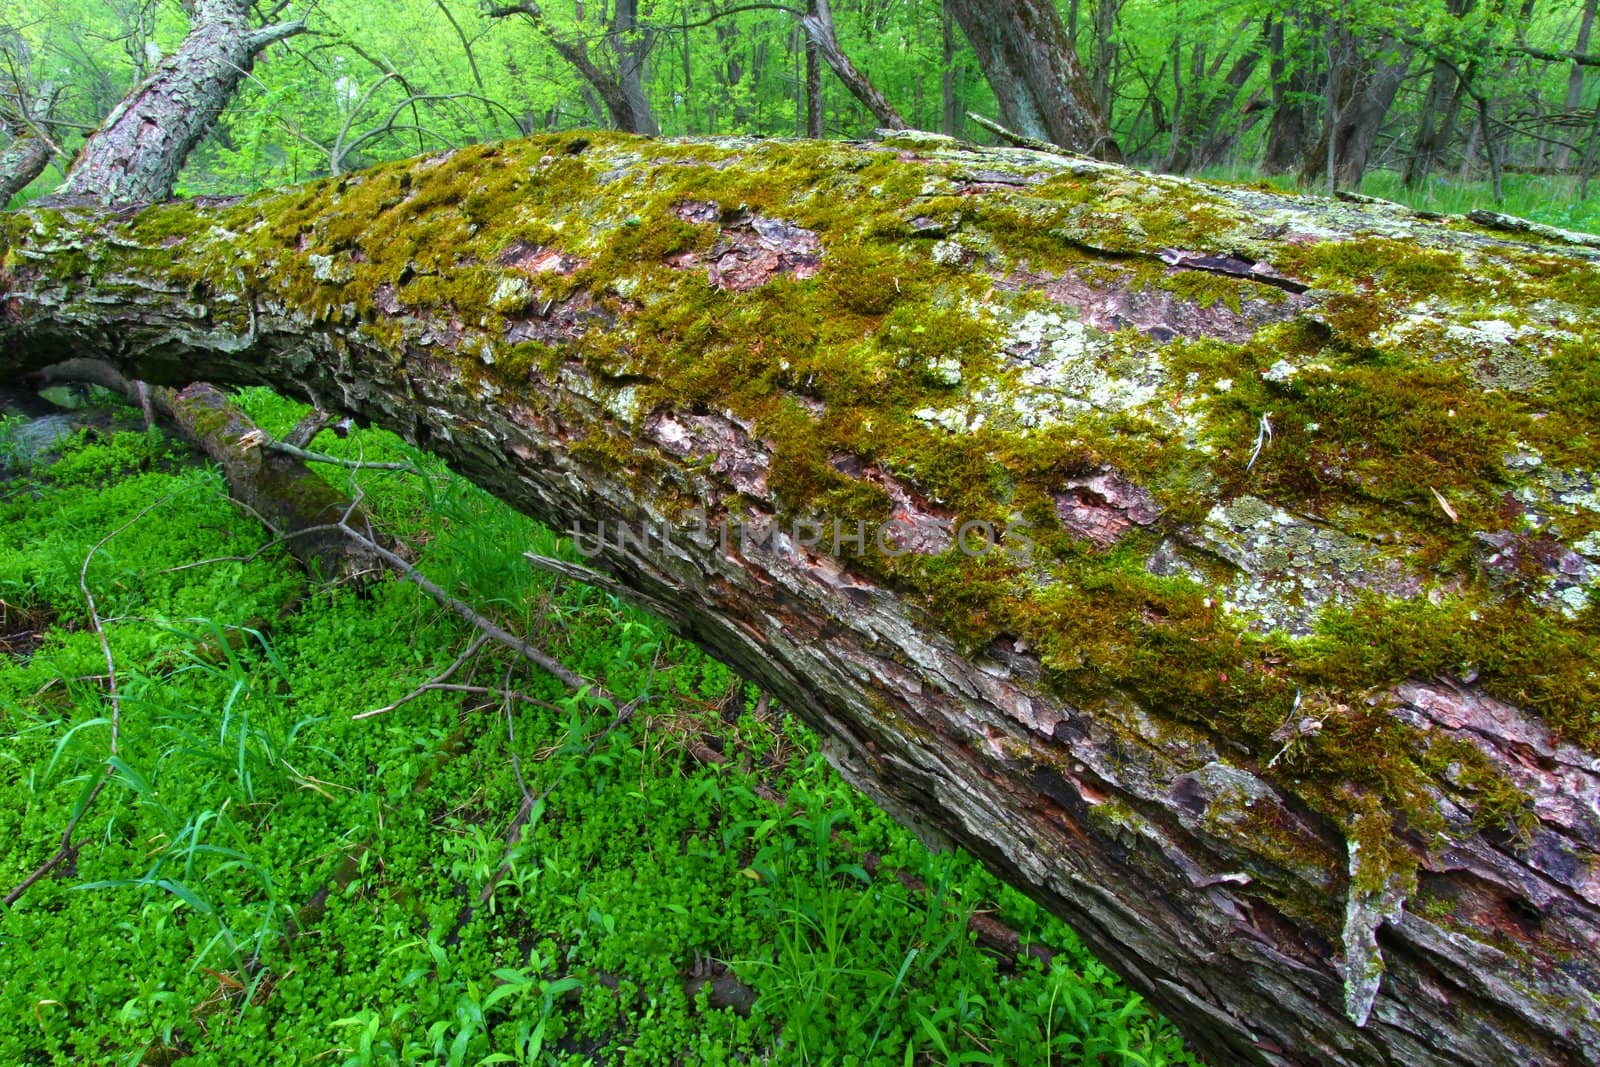 Moss grows on a fallen tree in a lush forest of northern Illinois.